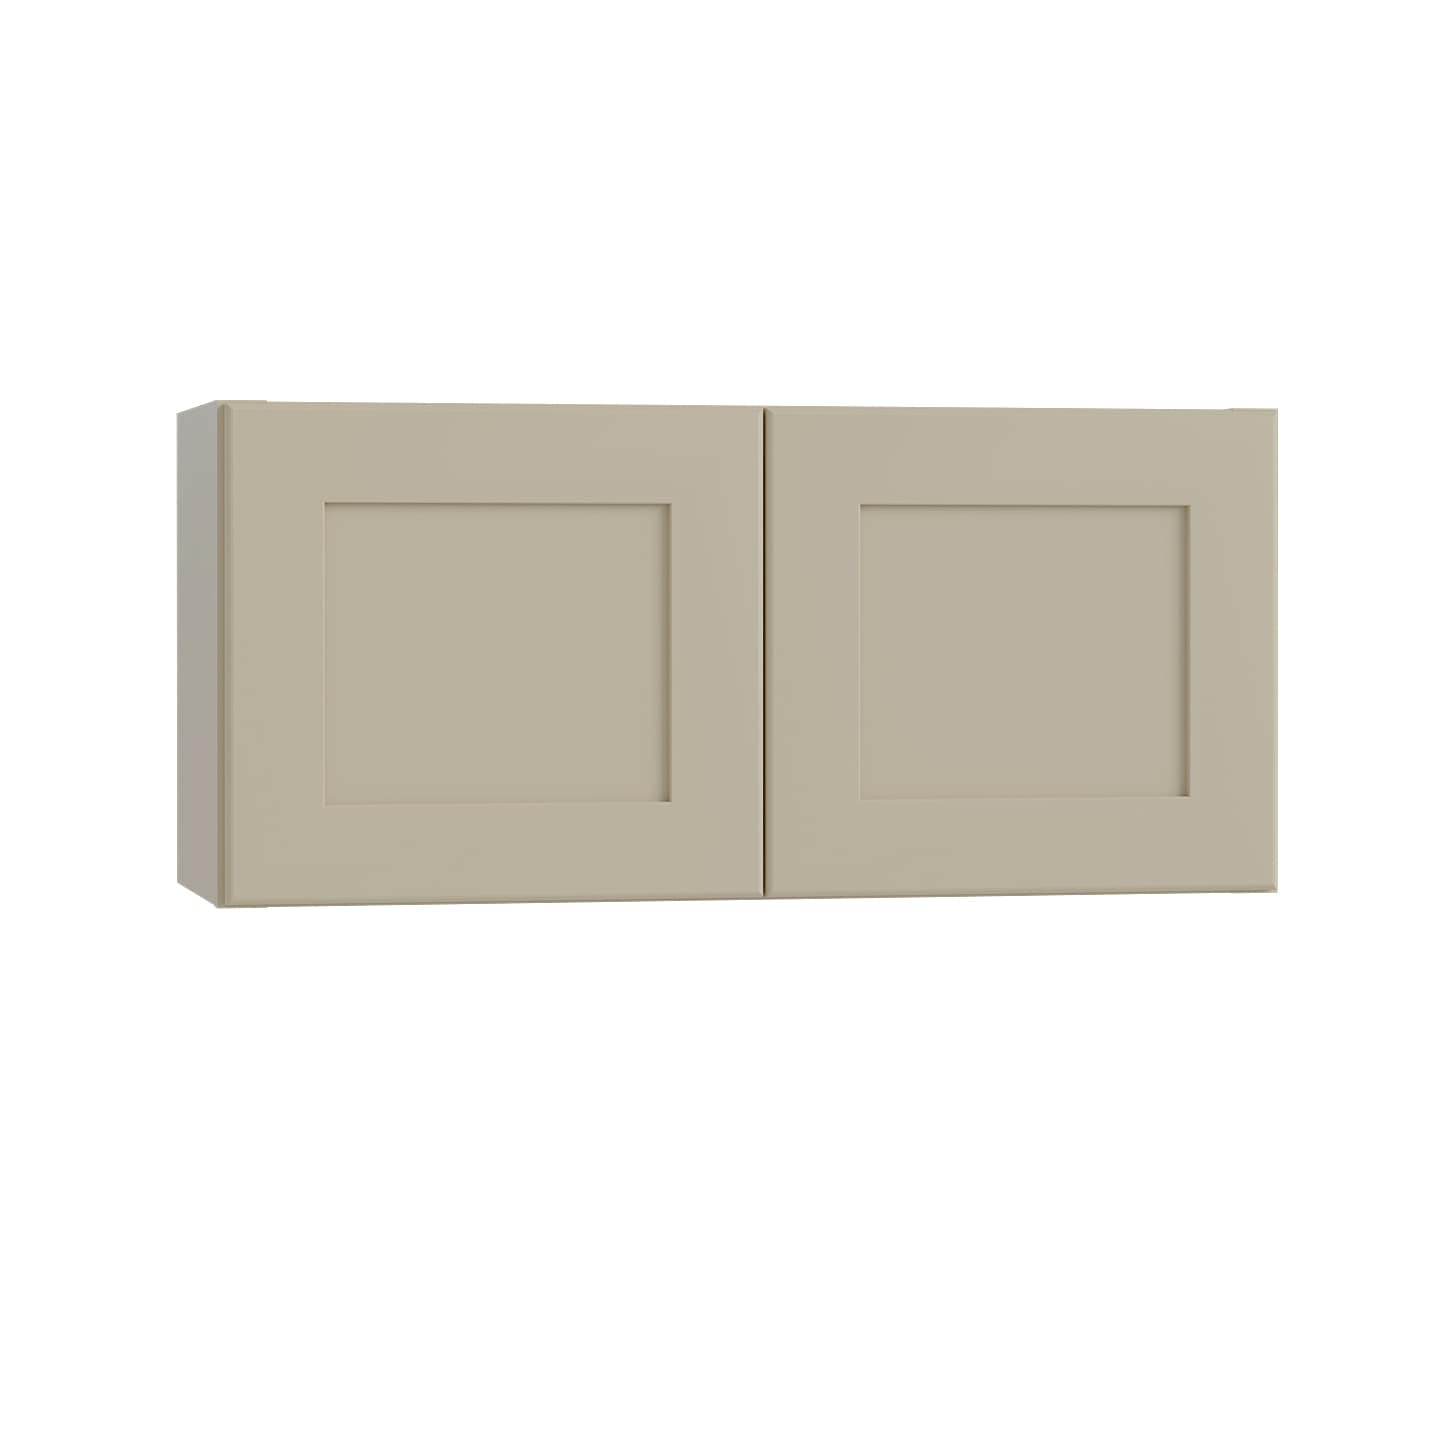 Luxxe Cabinetry 24-in W x 18-in H x 12-in D Norfolk Blended Cream Painted Door Wall Fully Assembled Semi-custom Cabinet in Off-White | W2418-NBC